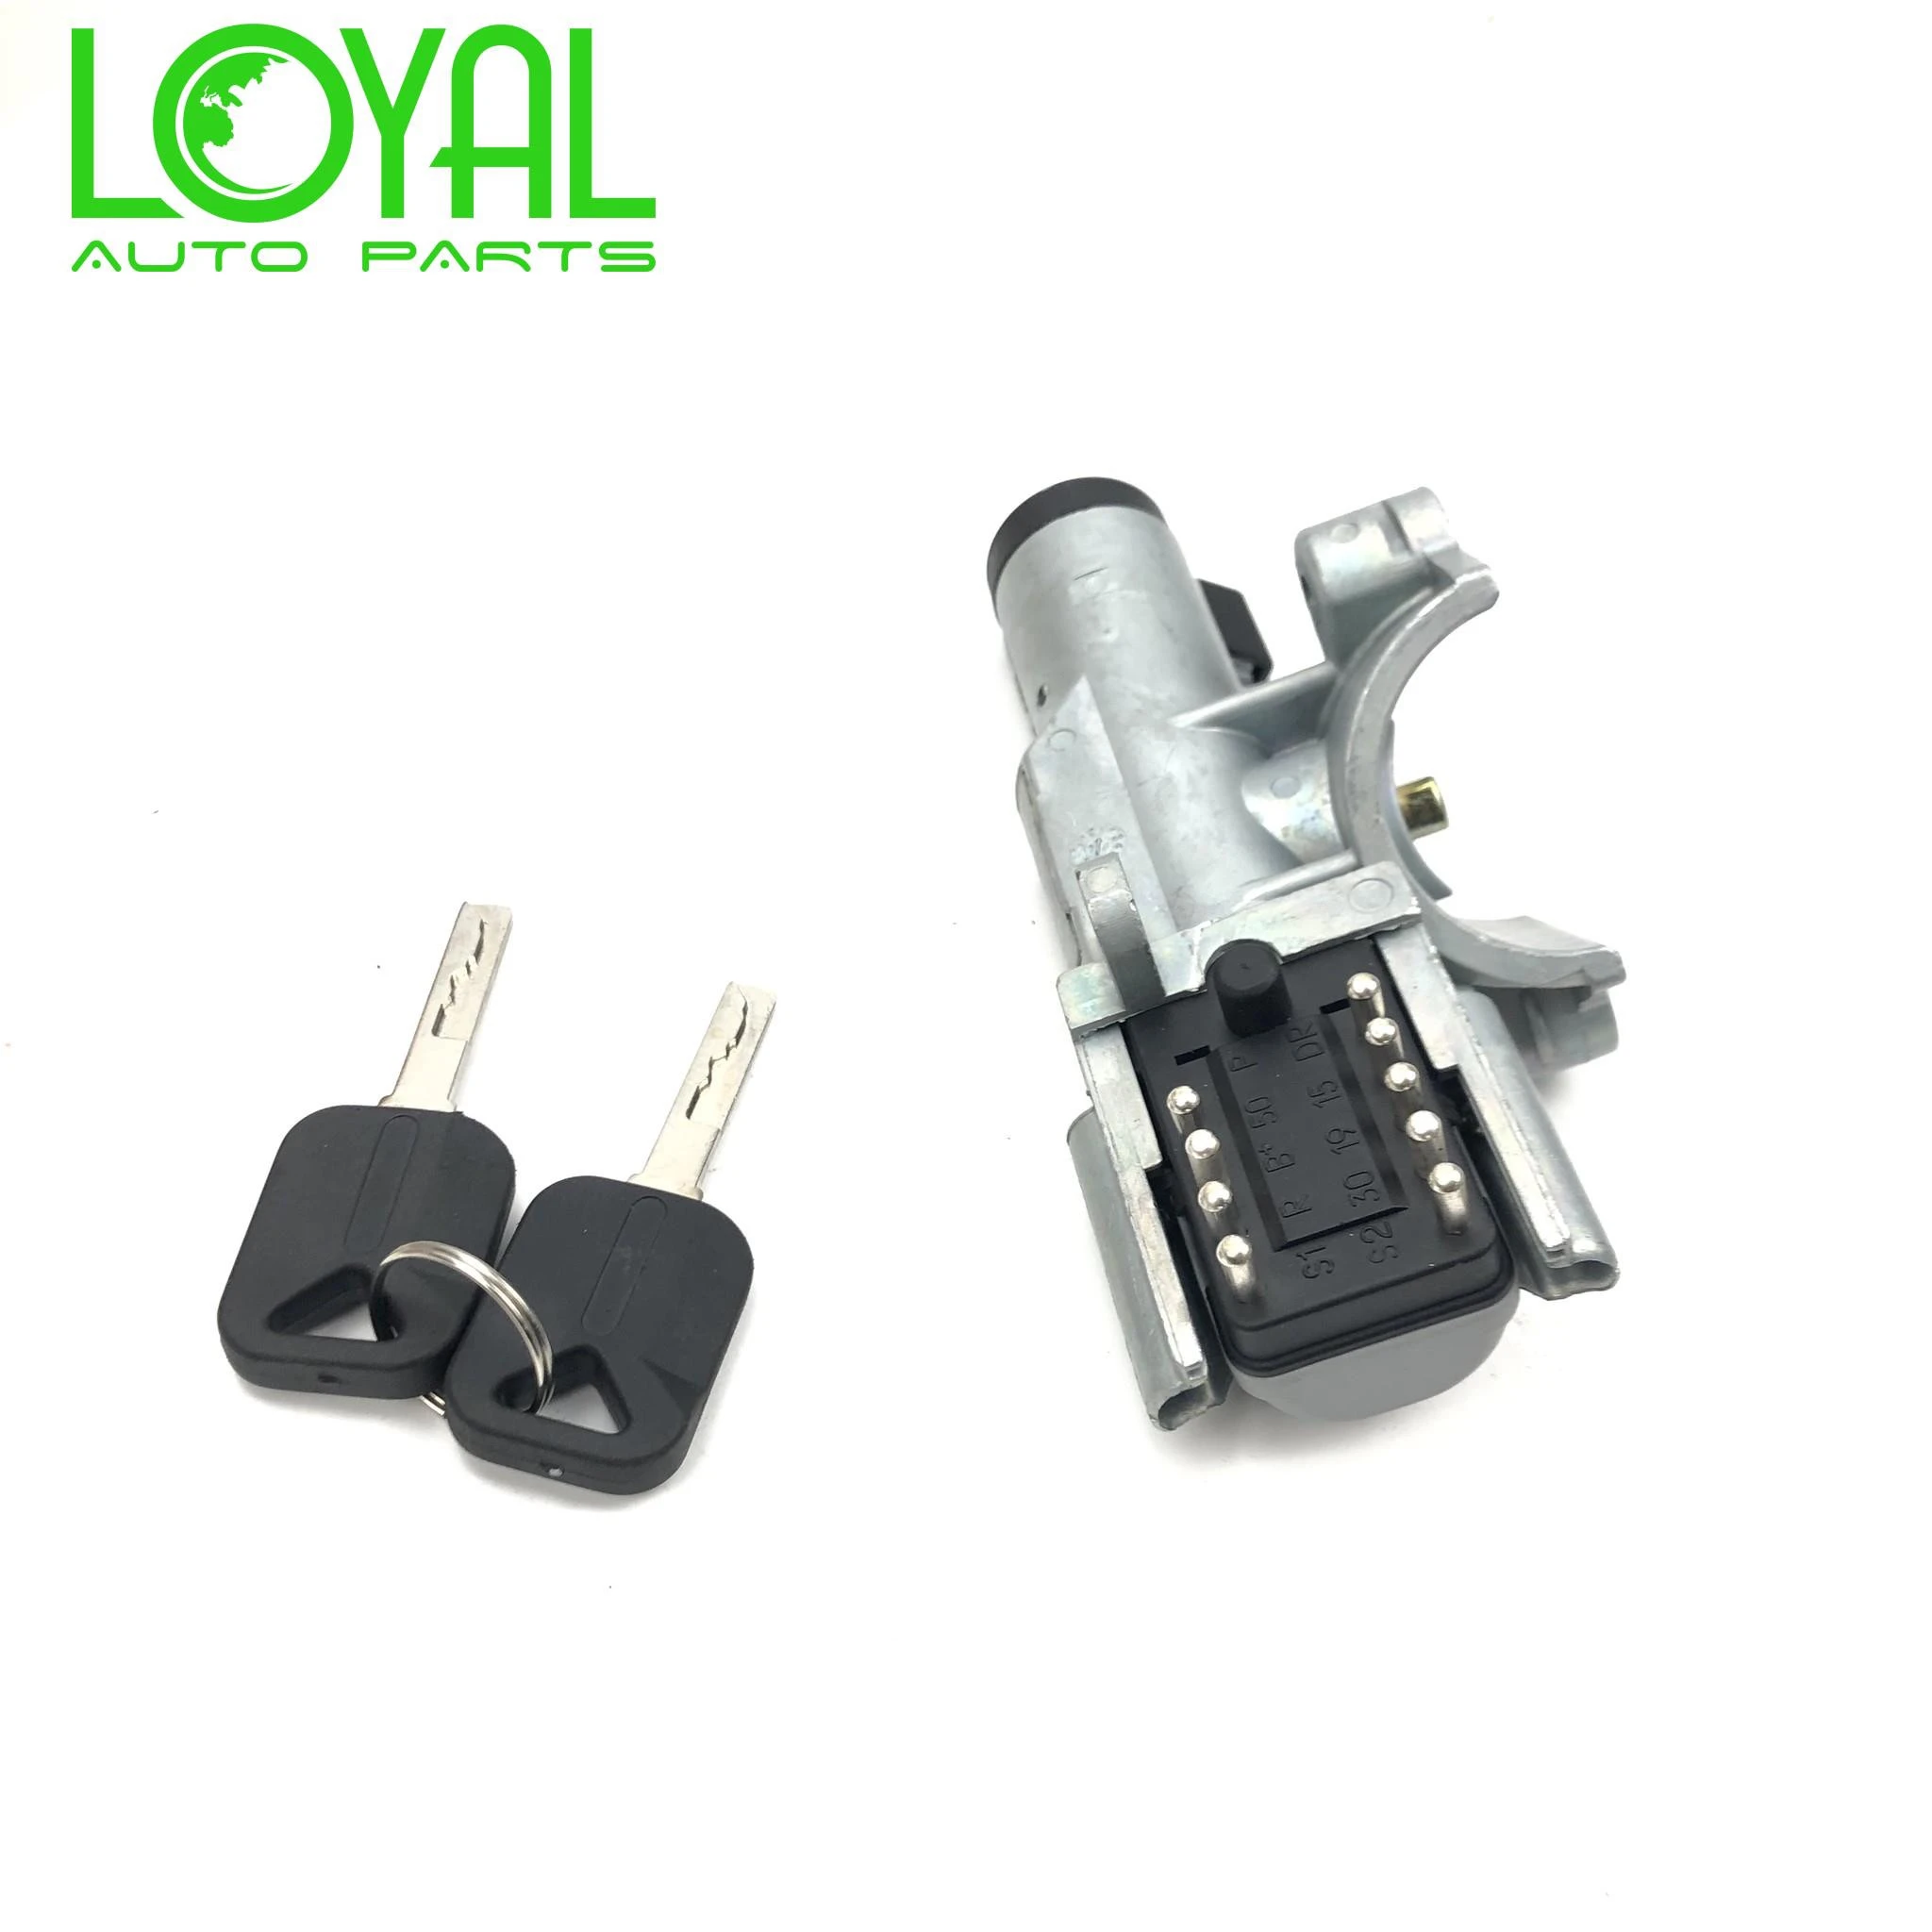 20398484 8159907 1095710 1063435 Ignition Lock Barrel Switch  Steering lock FOR  for VL Truck Ignition Starter Switch